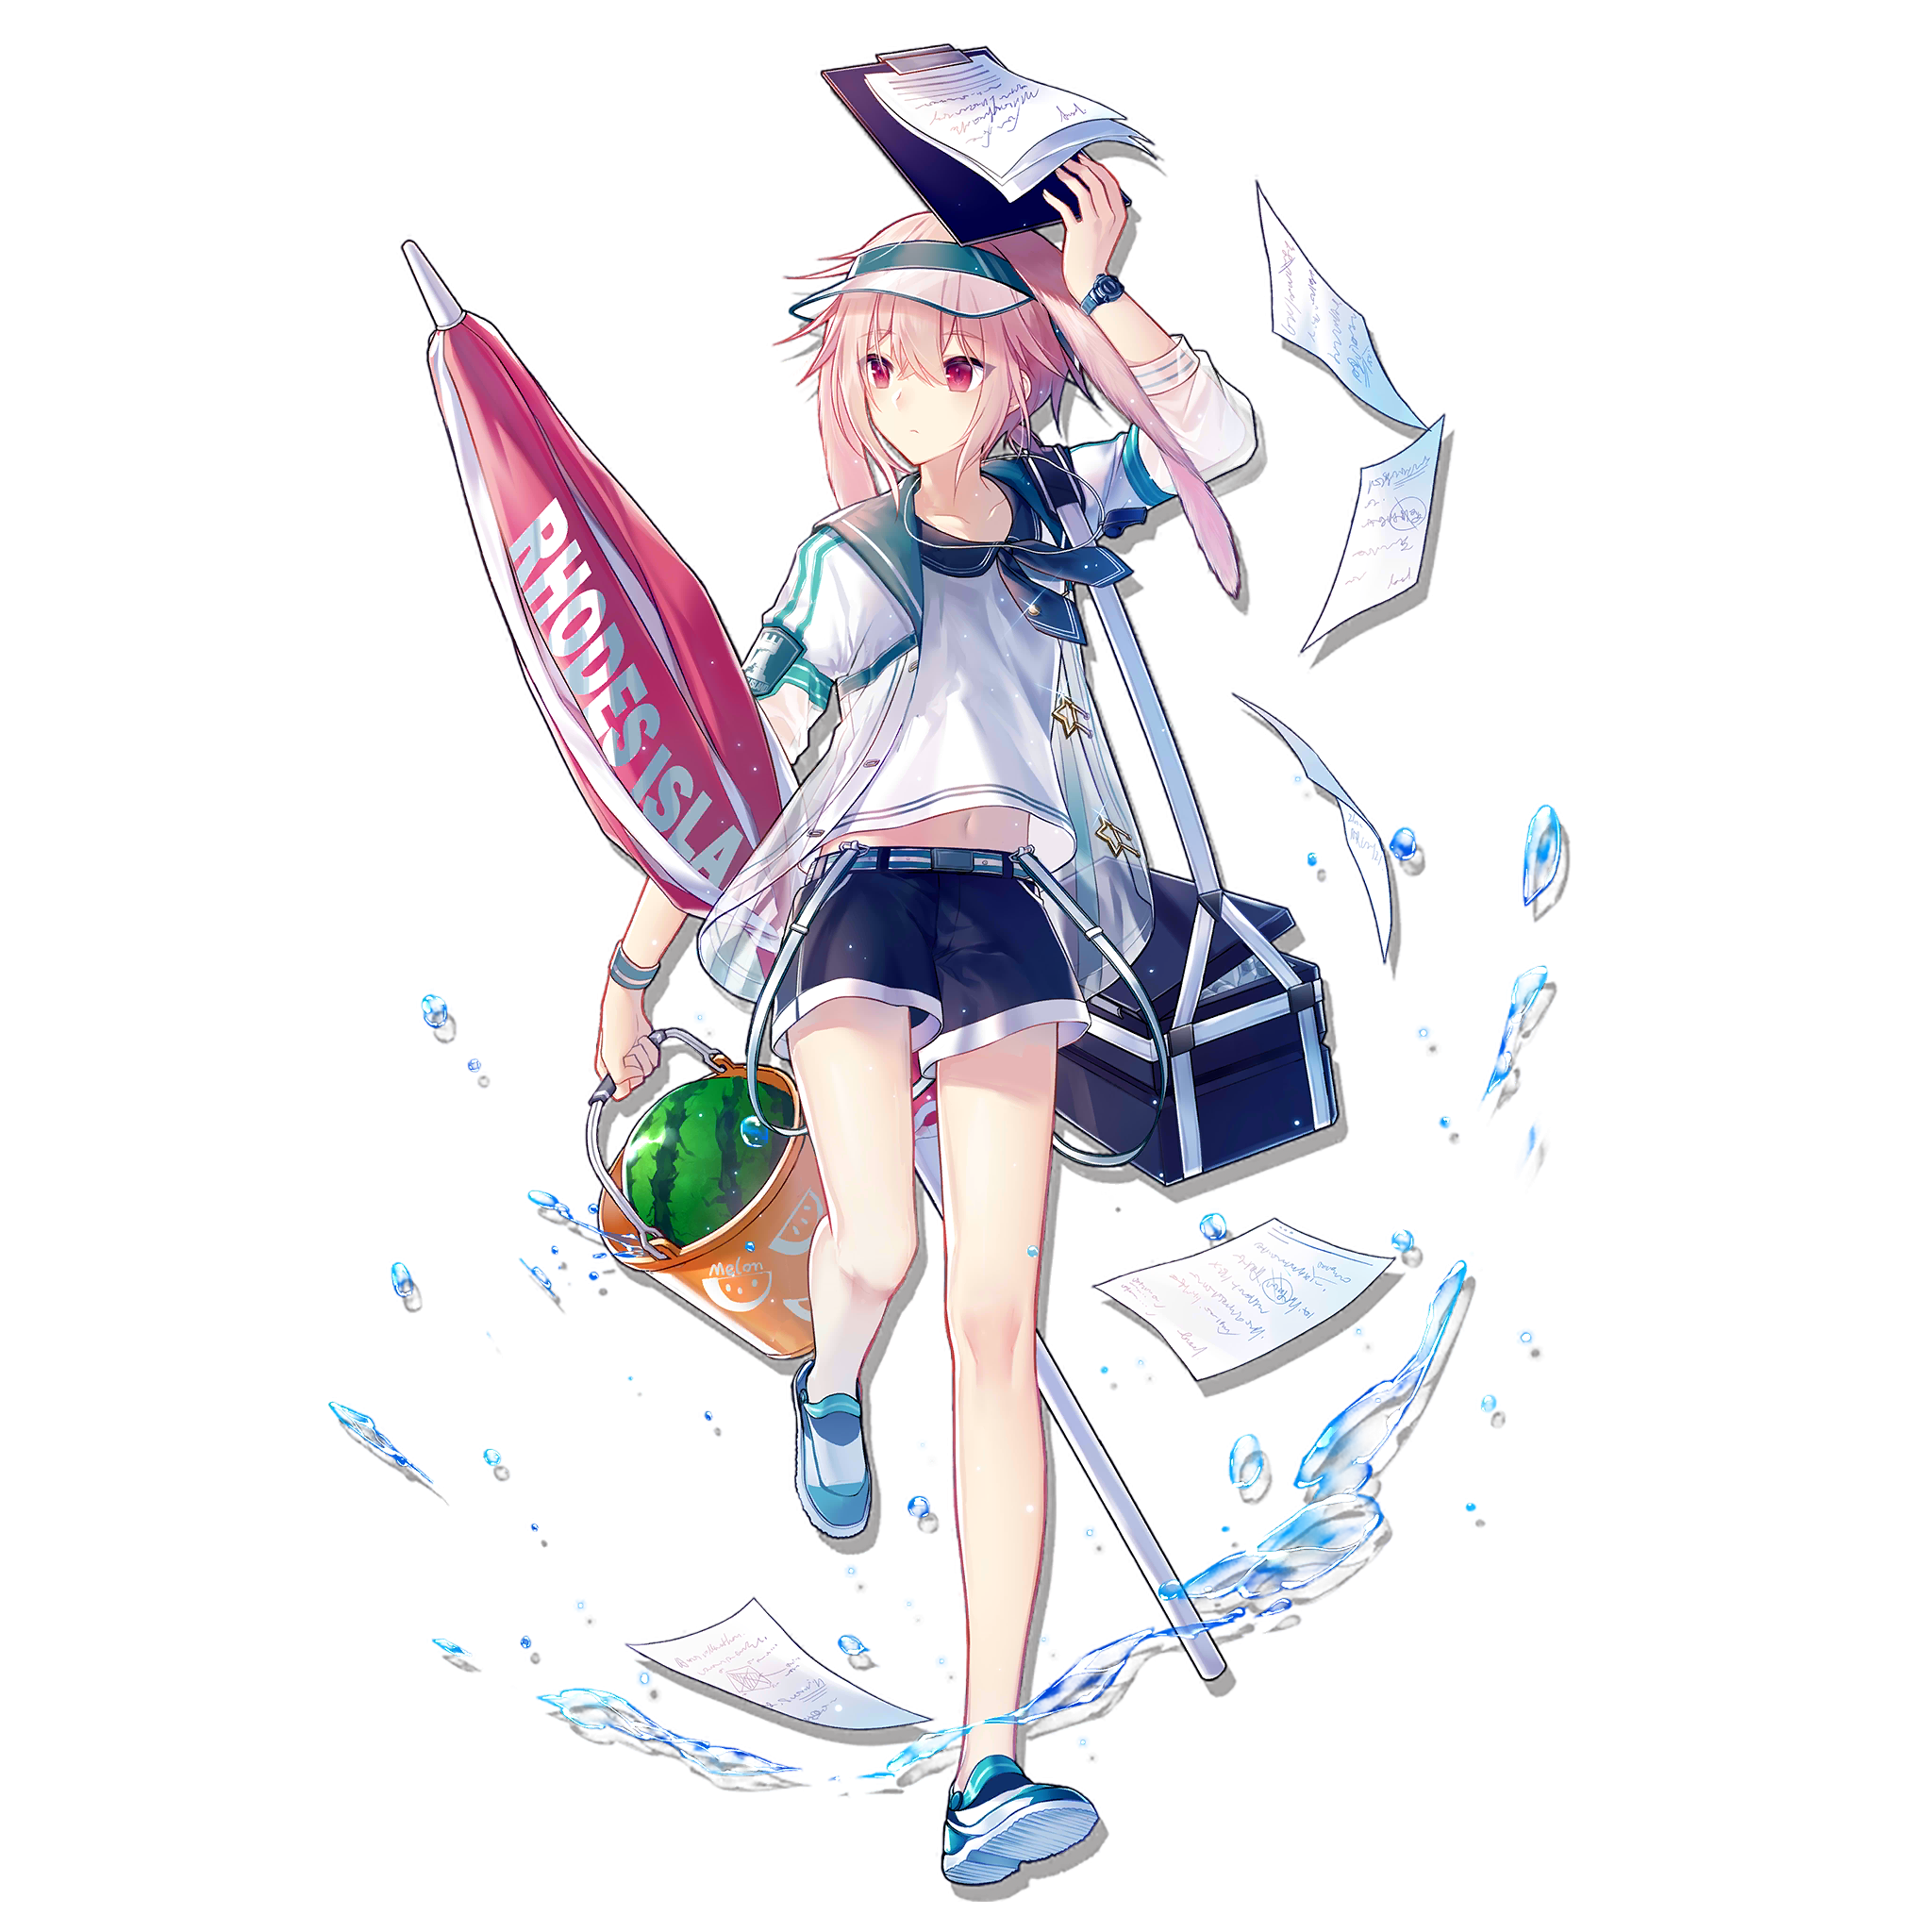 Pack 安赛尔 skin 1.png